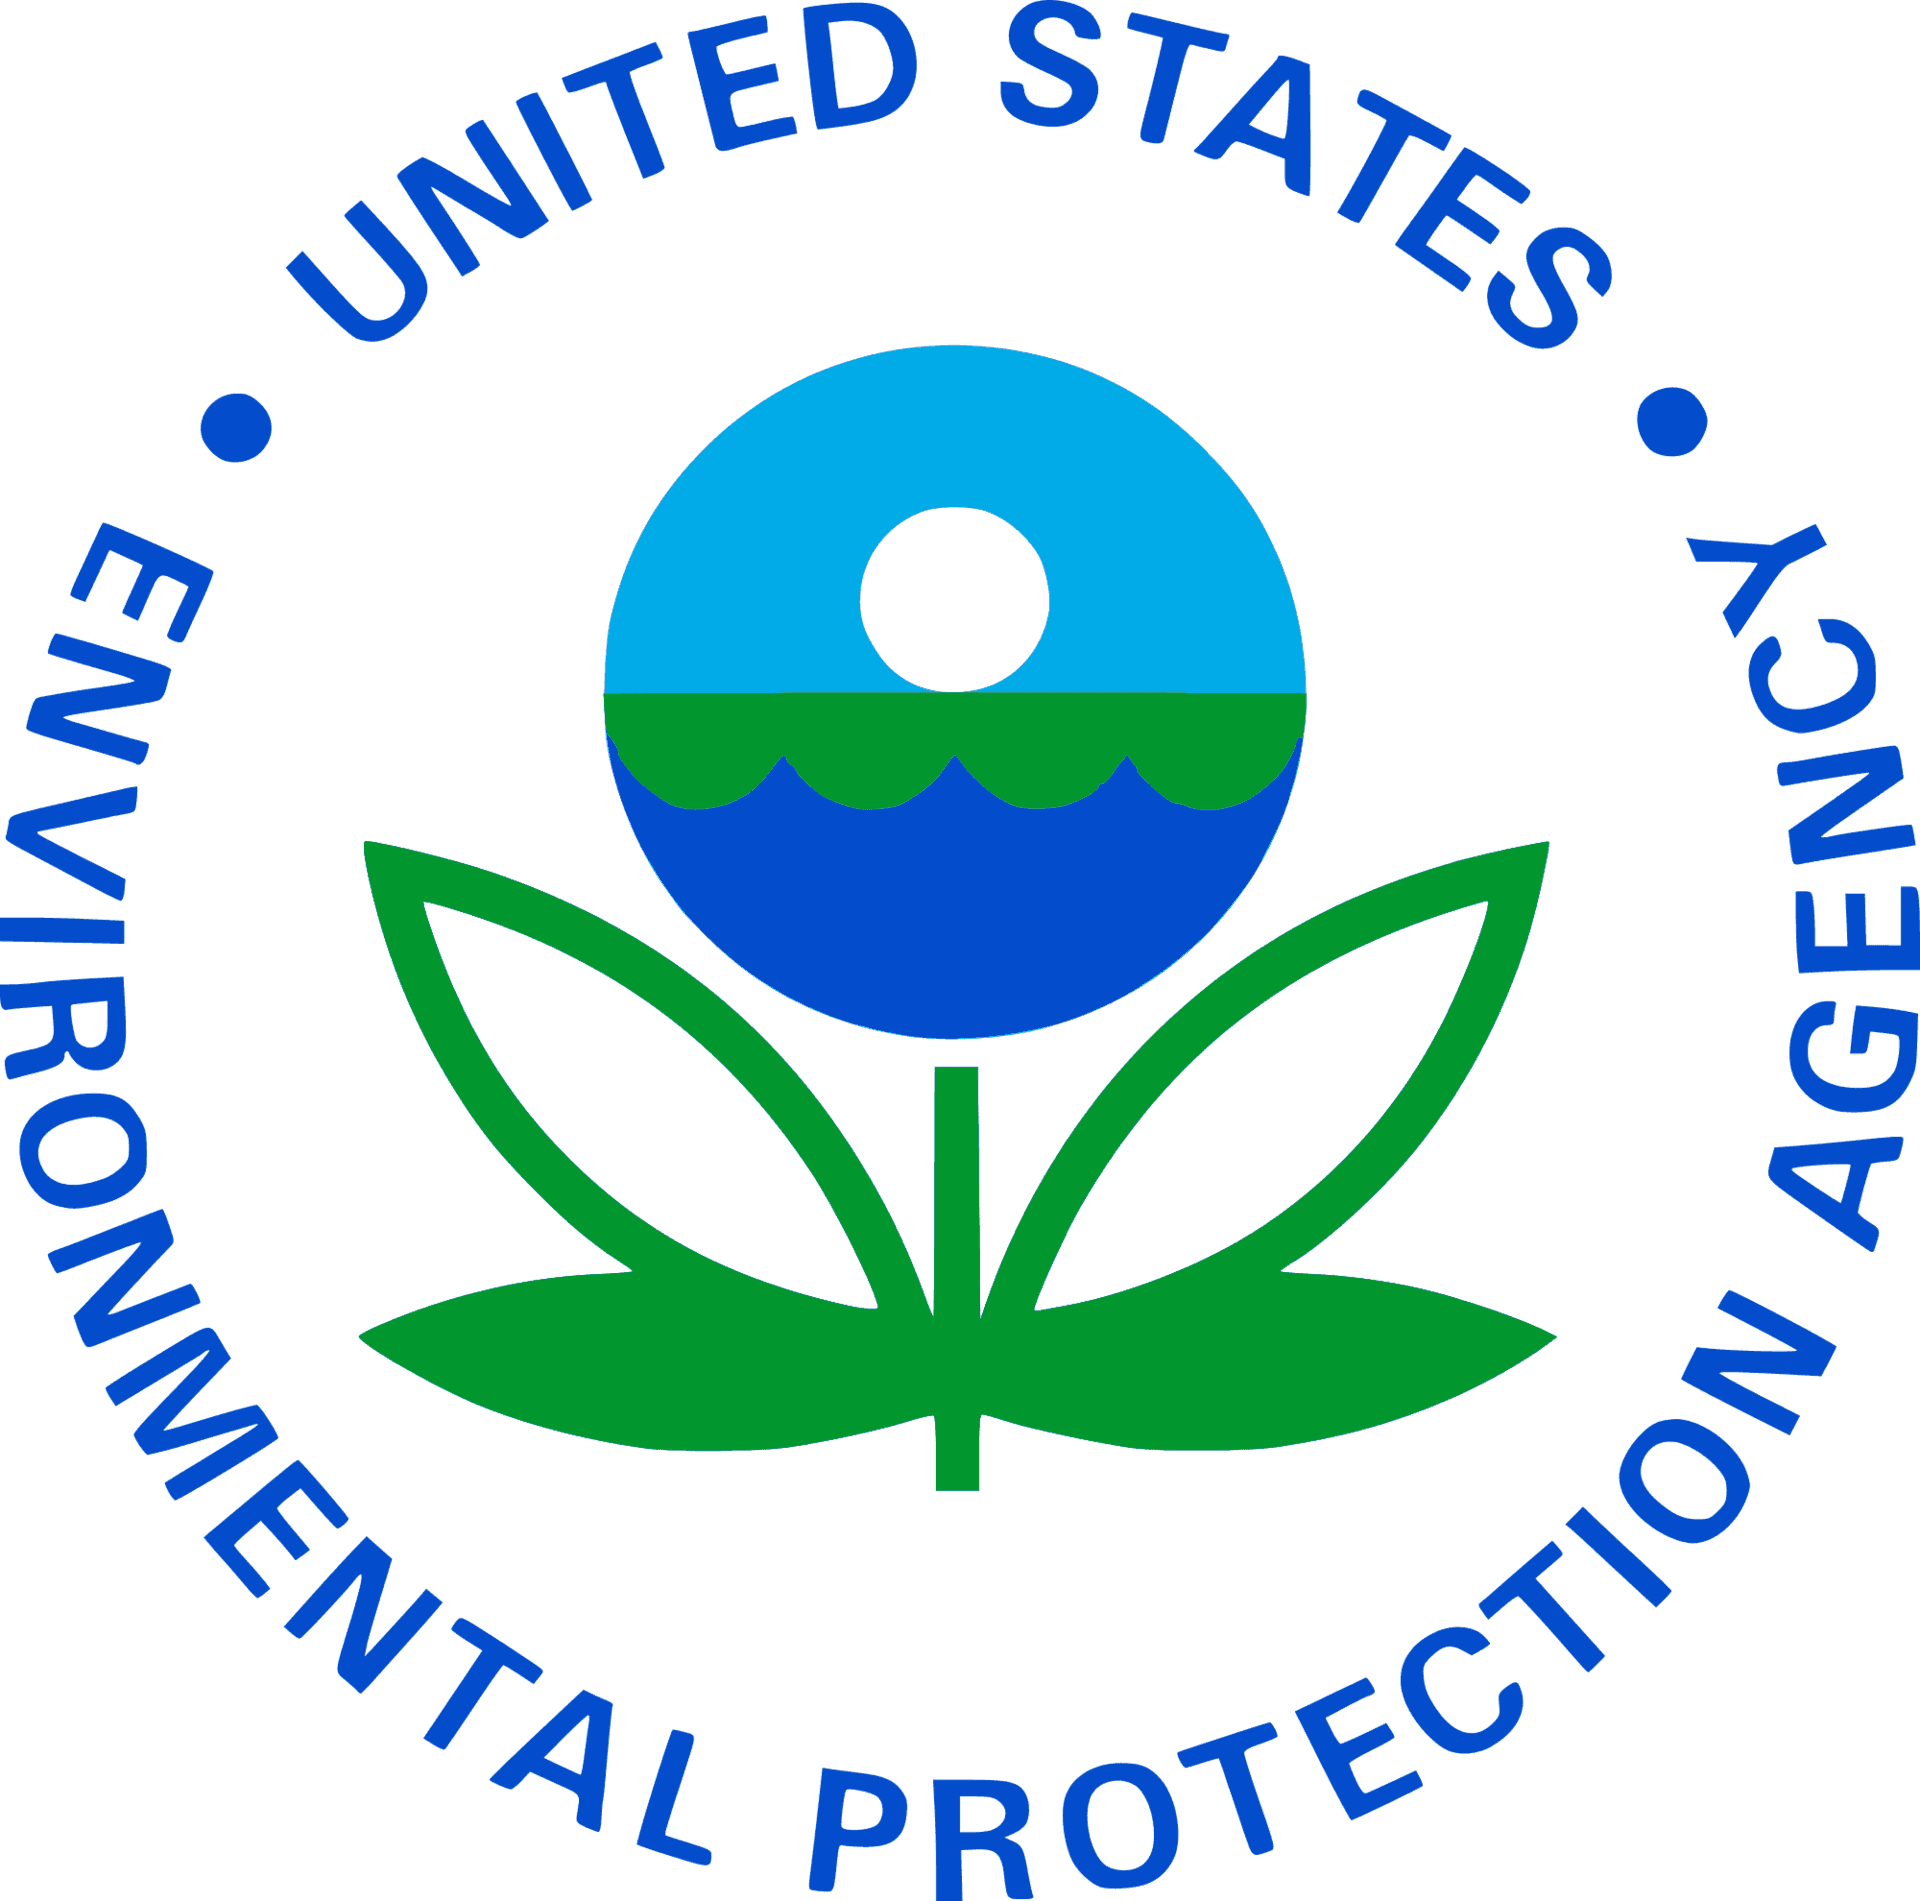 The logo for the united states environmental protection agency